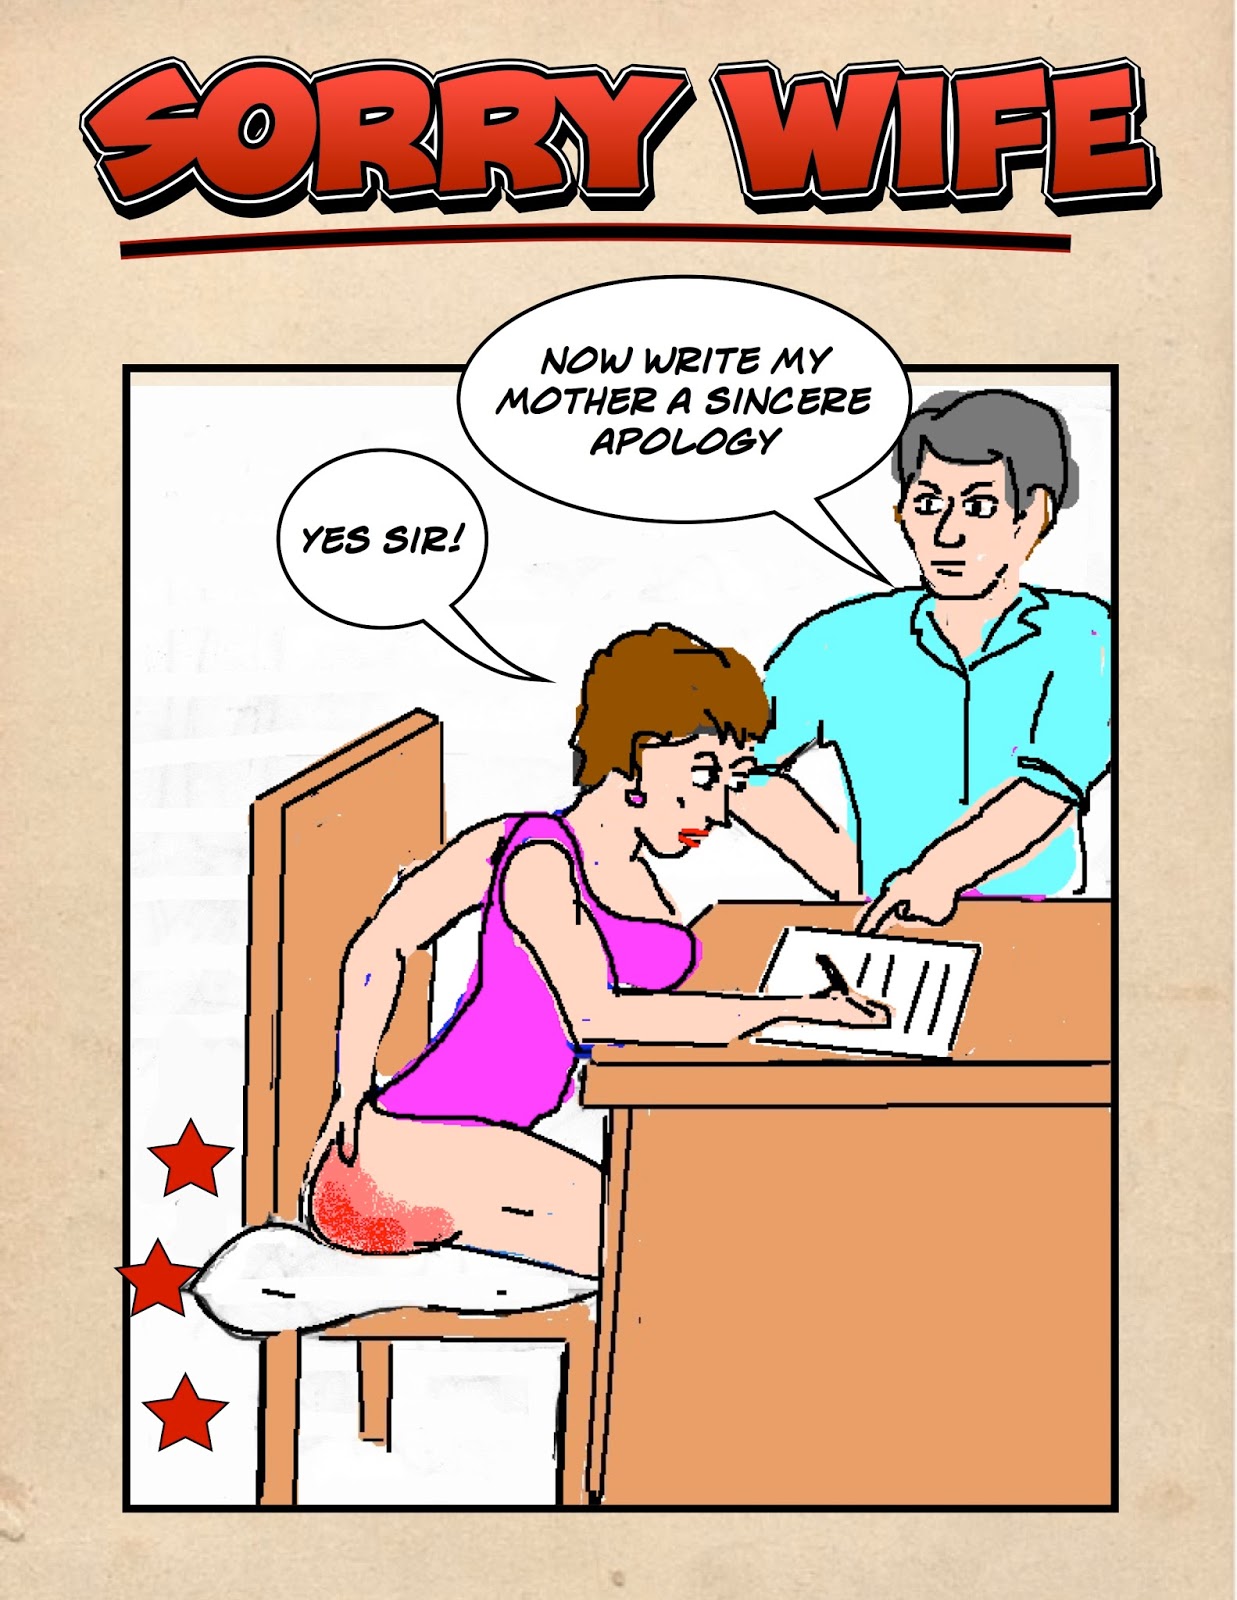 getting spanked by my wife stories - I Confess I got spanked by my friend.